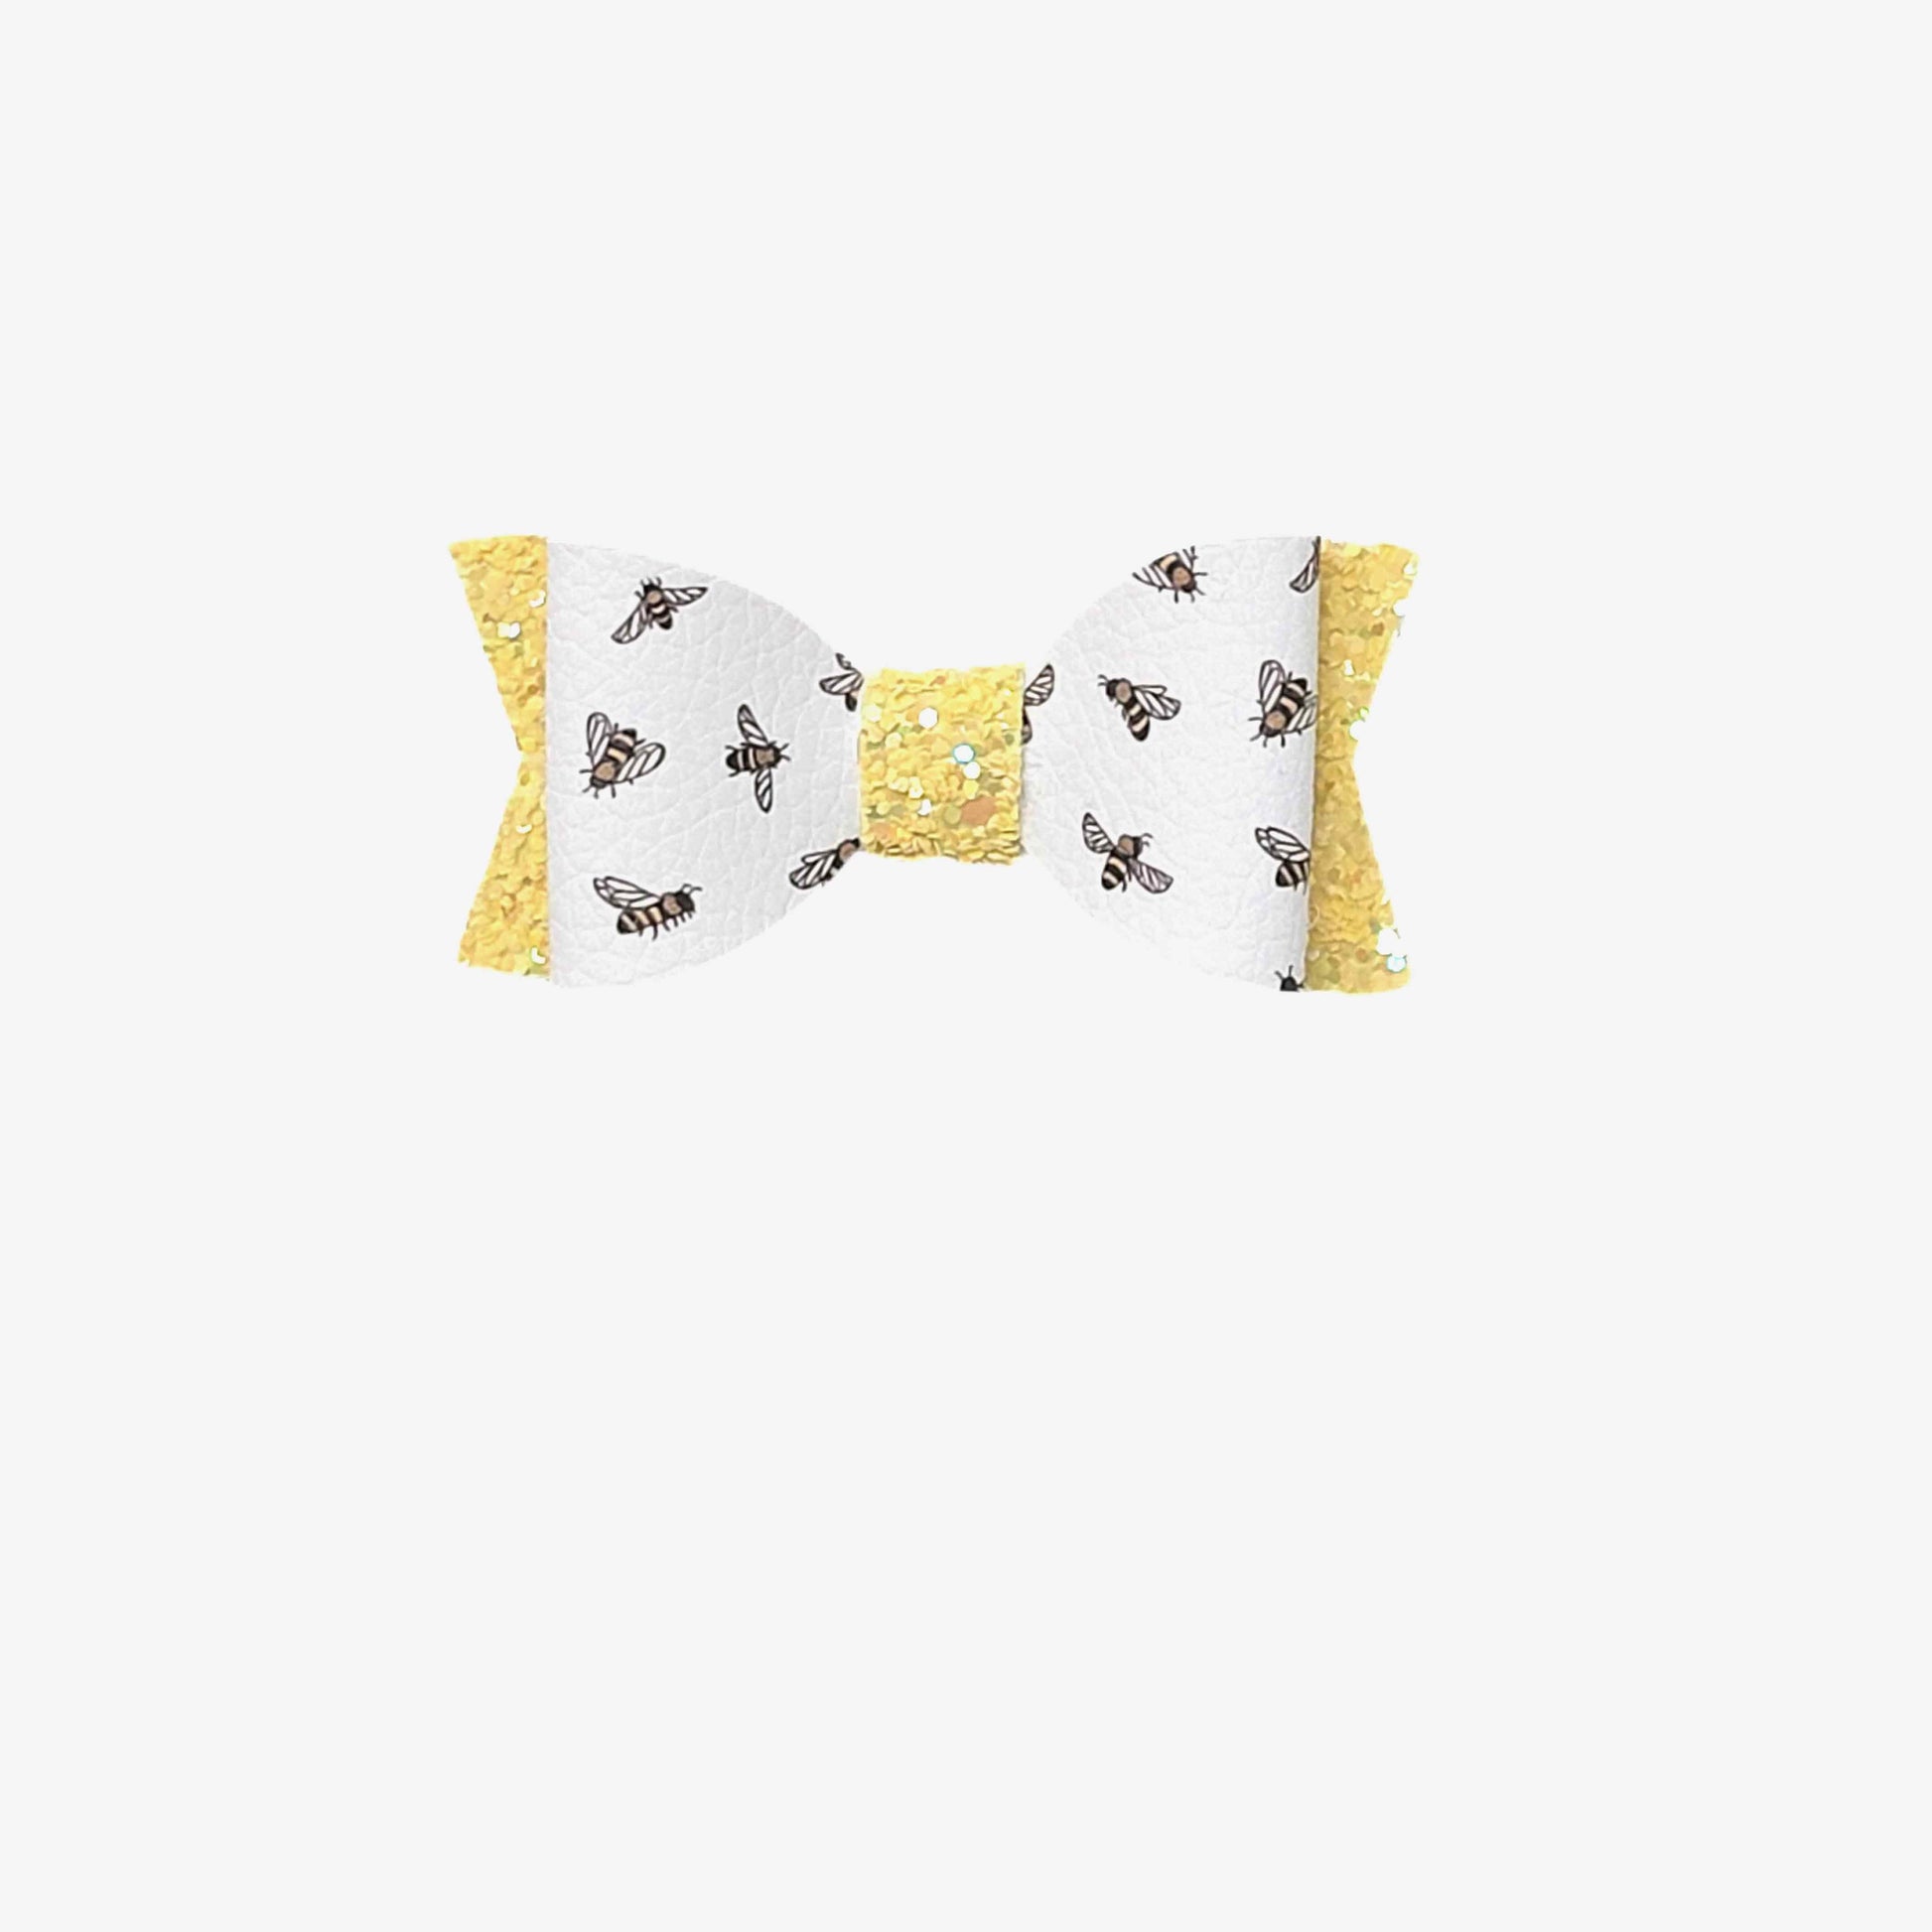 Honeybees Claire Bow 2.75" (pair)